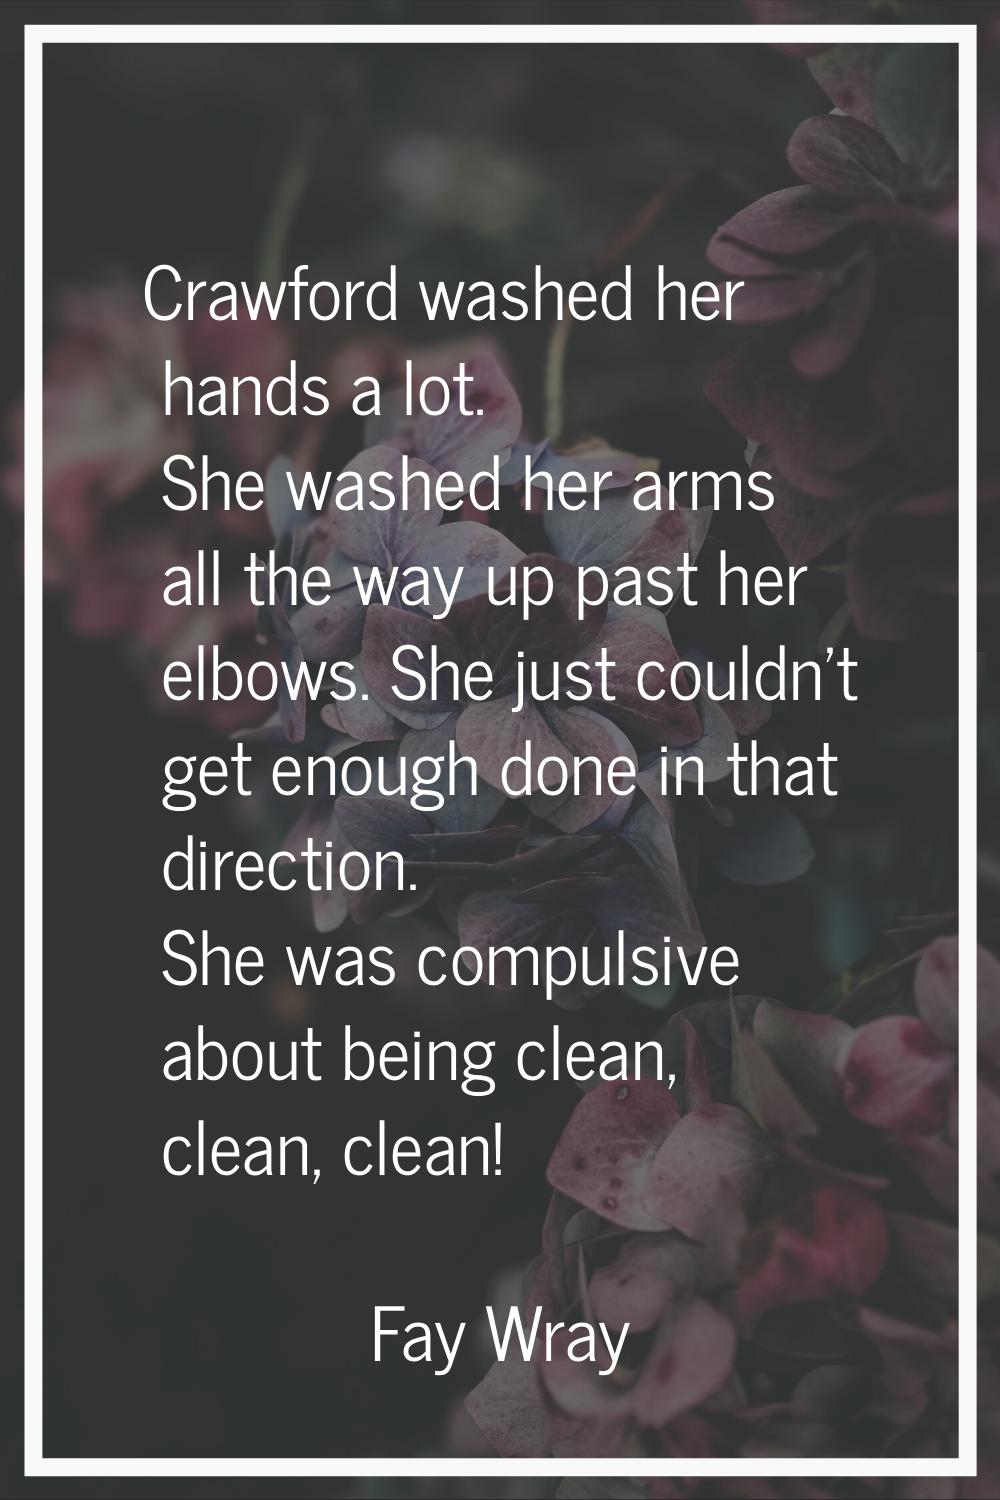 Crawford washed her hands a lot. She washed her arms all the way up past her elbows. She just could